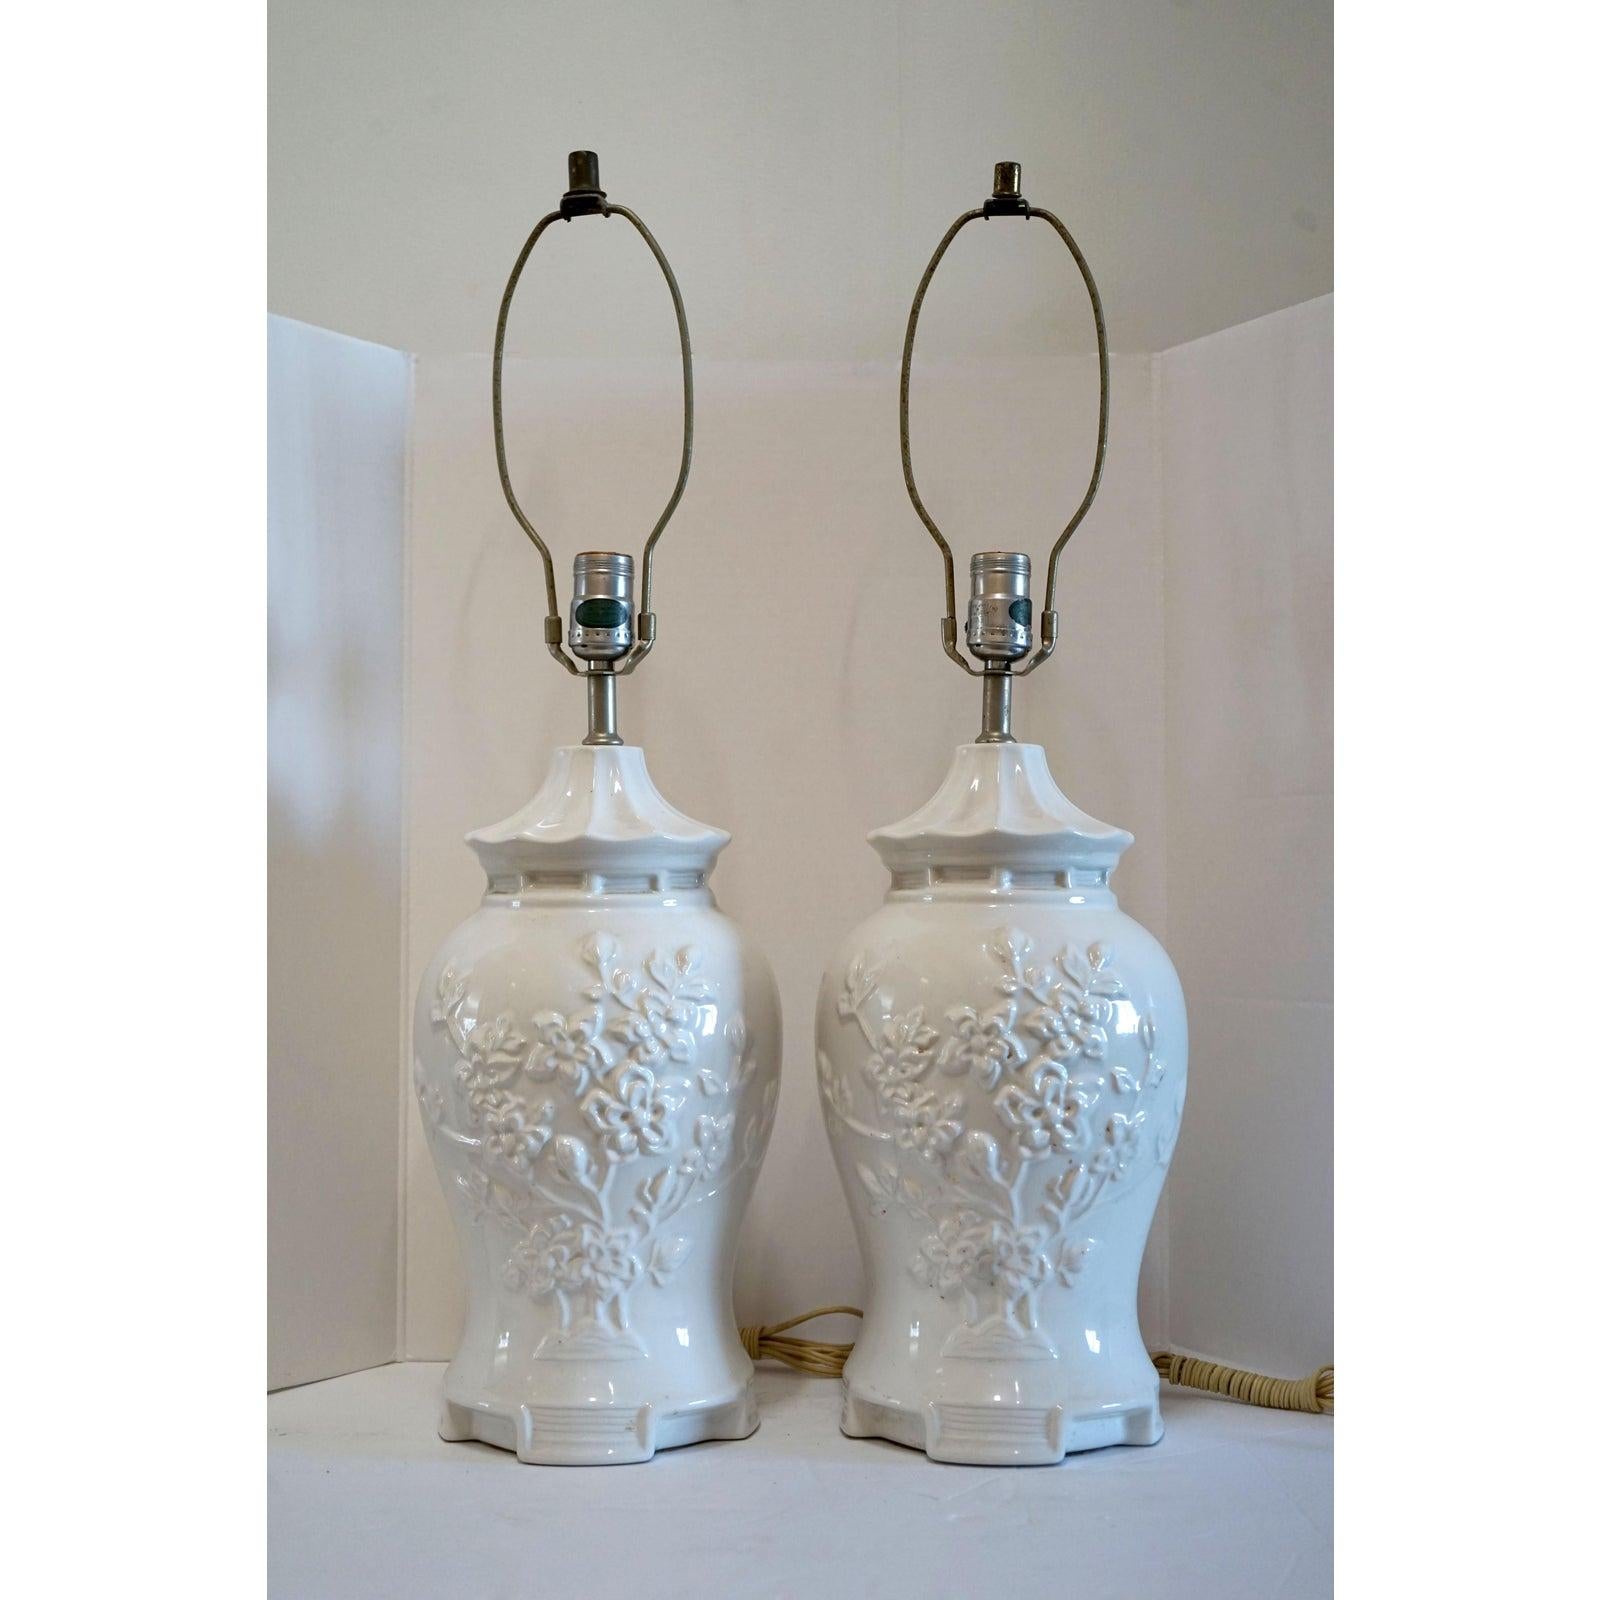 A pair of temple jar blanc de chine lamps are impressive in a variety of settings with their baluster or ginger jar form. They are gorgeous with the most beautiful high glaze imaginable. The porcelain lamps are covered--front and back with engraved